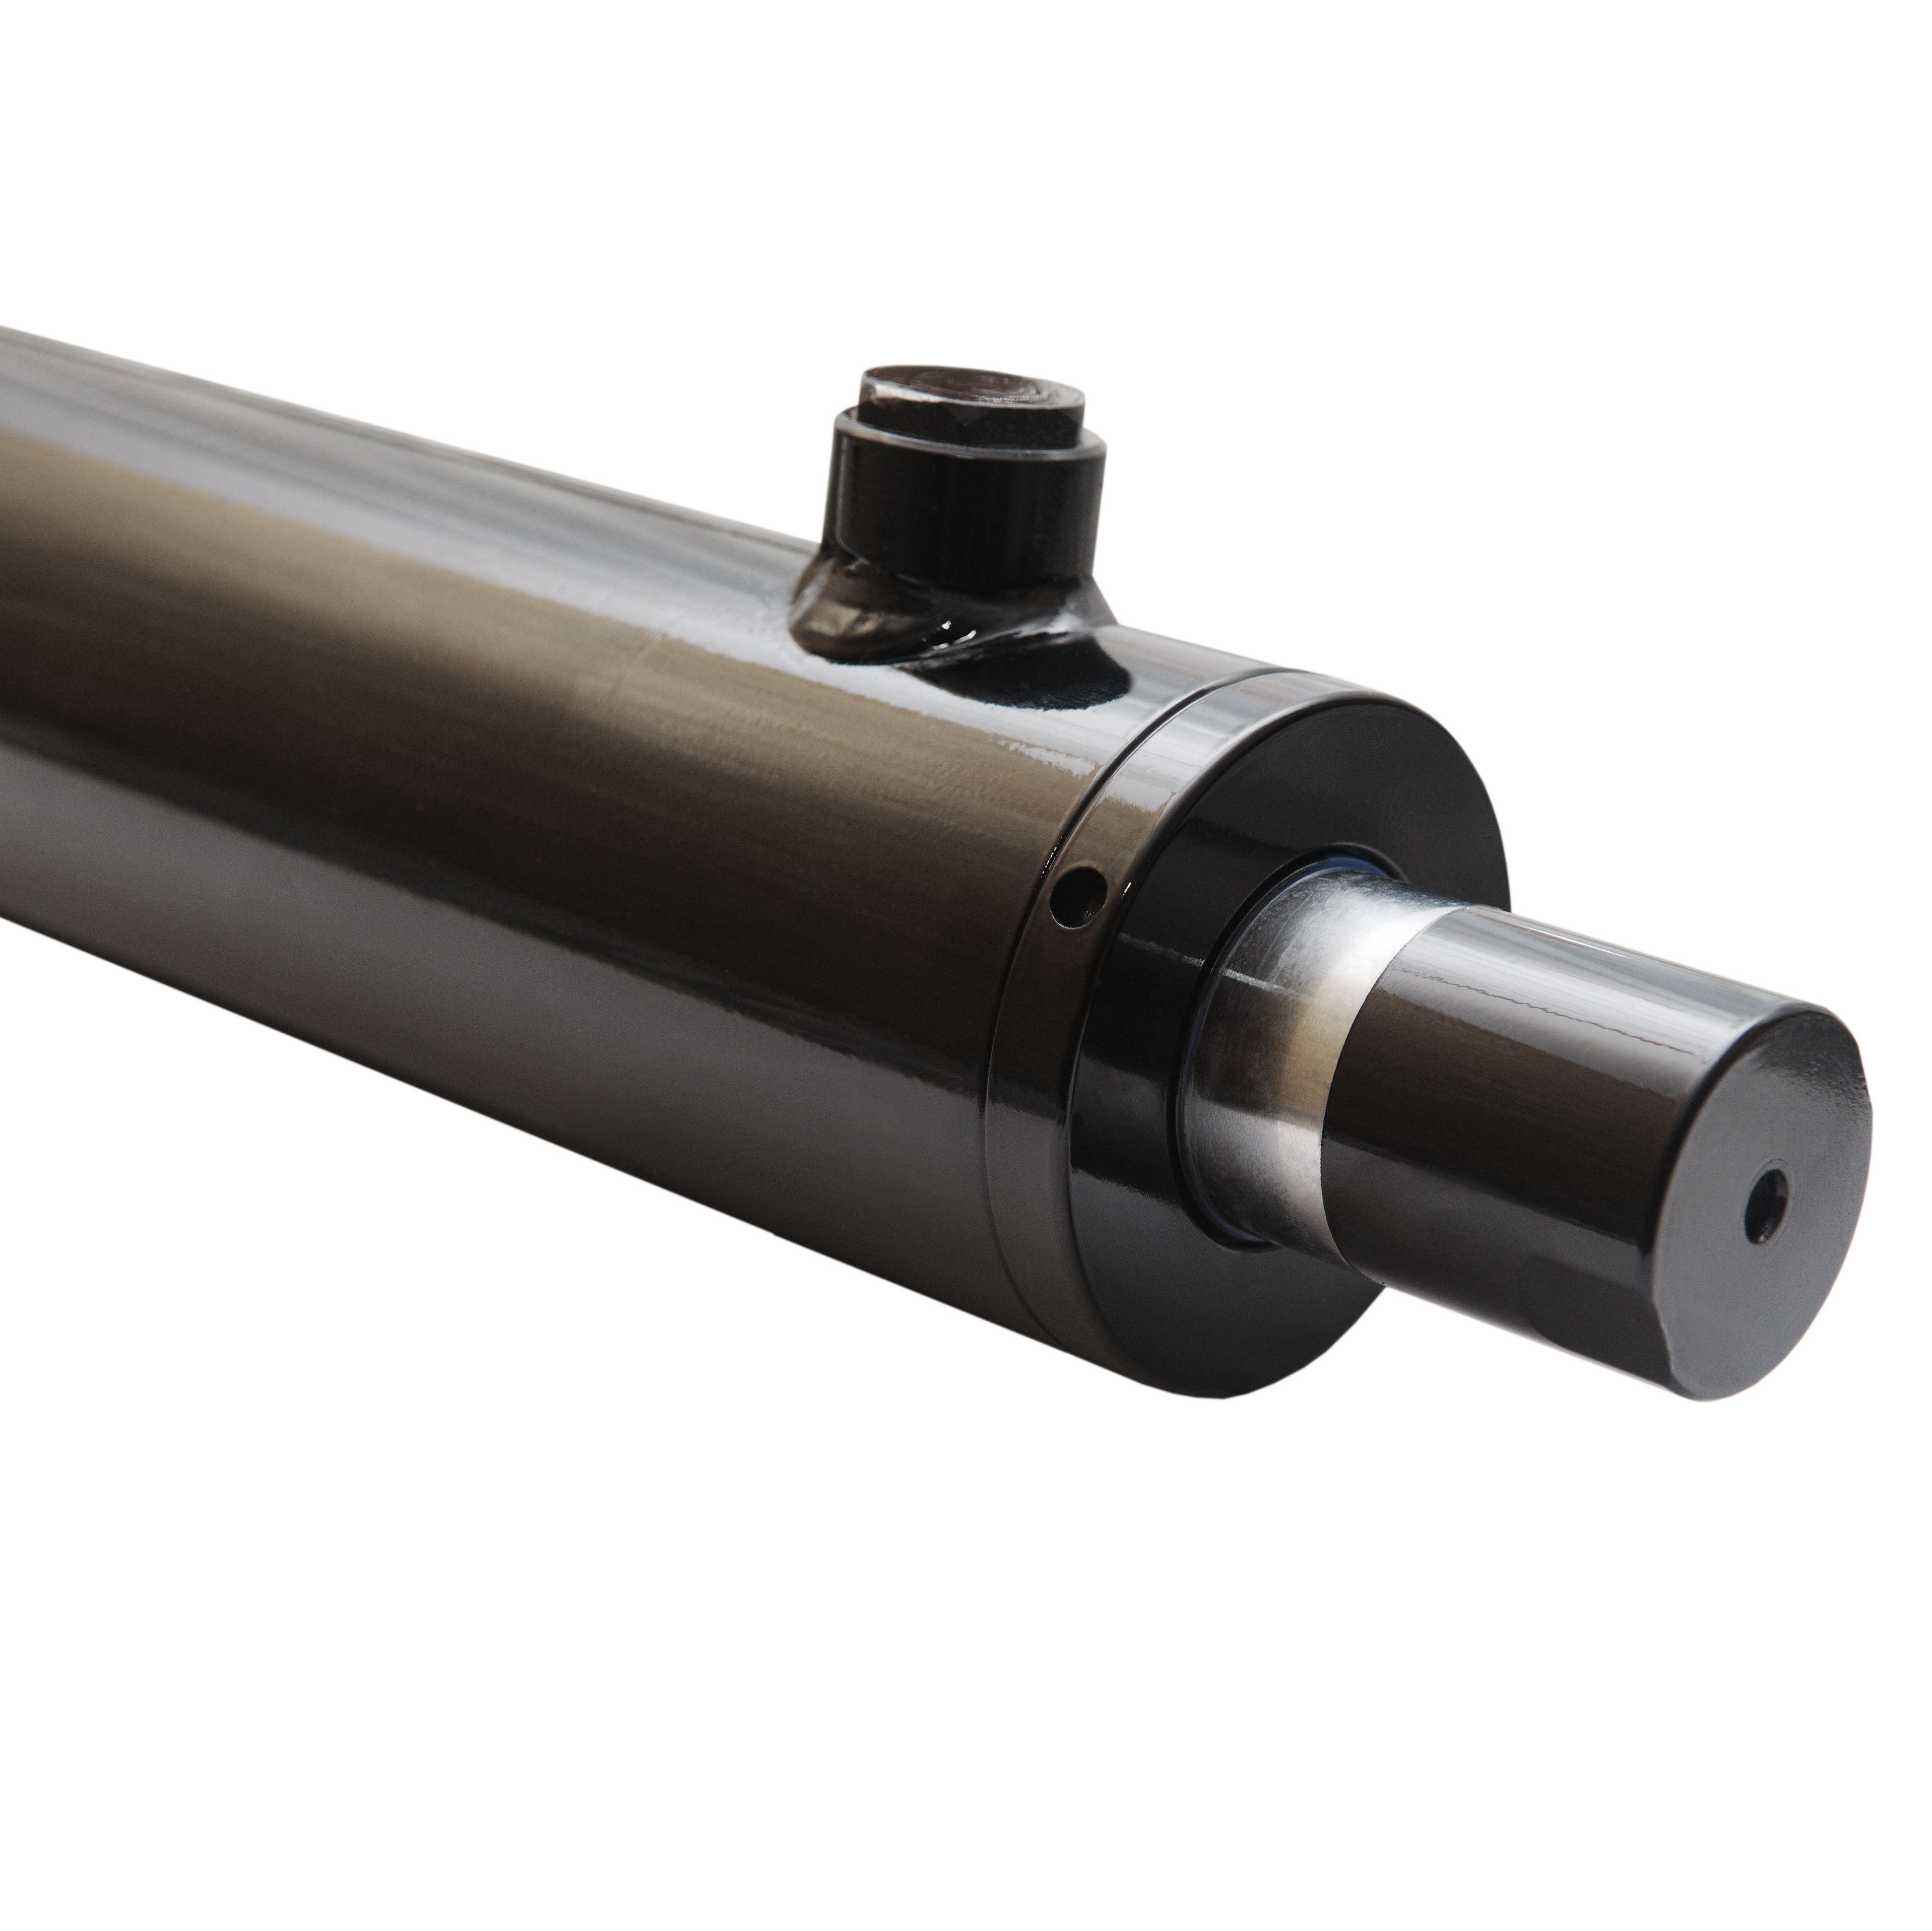 2.5 bore x 22 stroke hydraulic cylinder, welded universal double acting cylinder | Magister Hydraulics